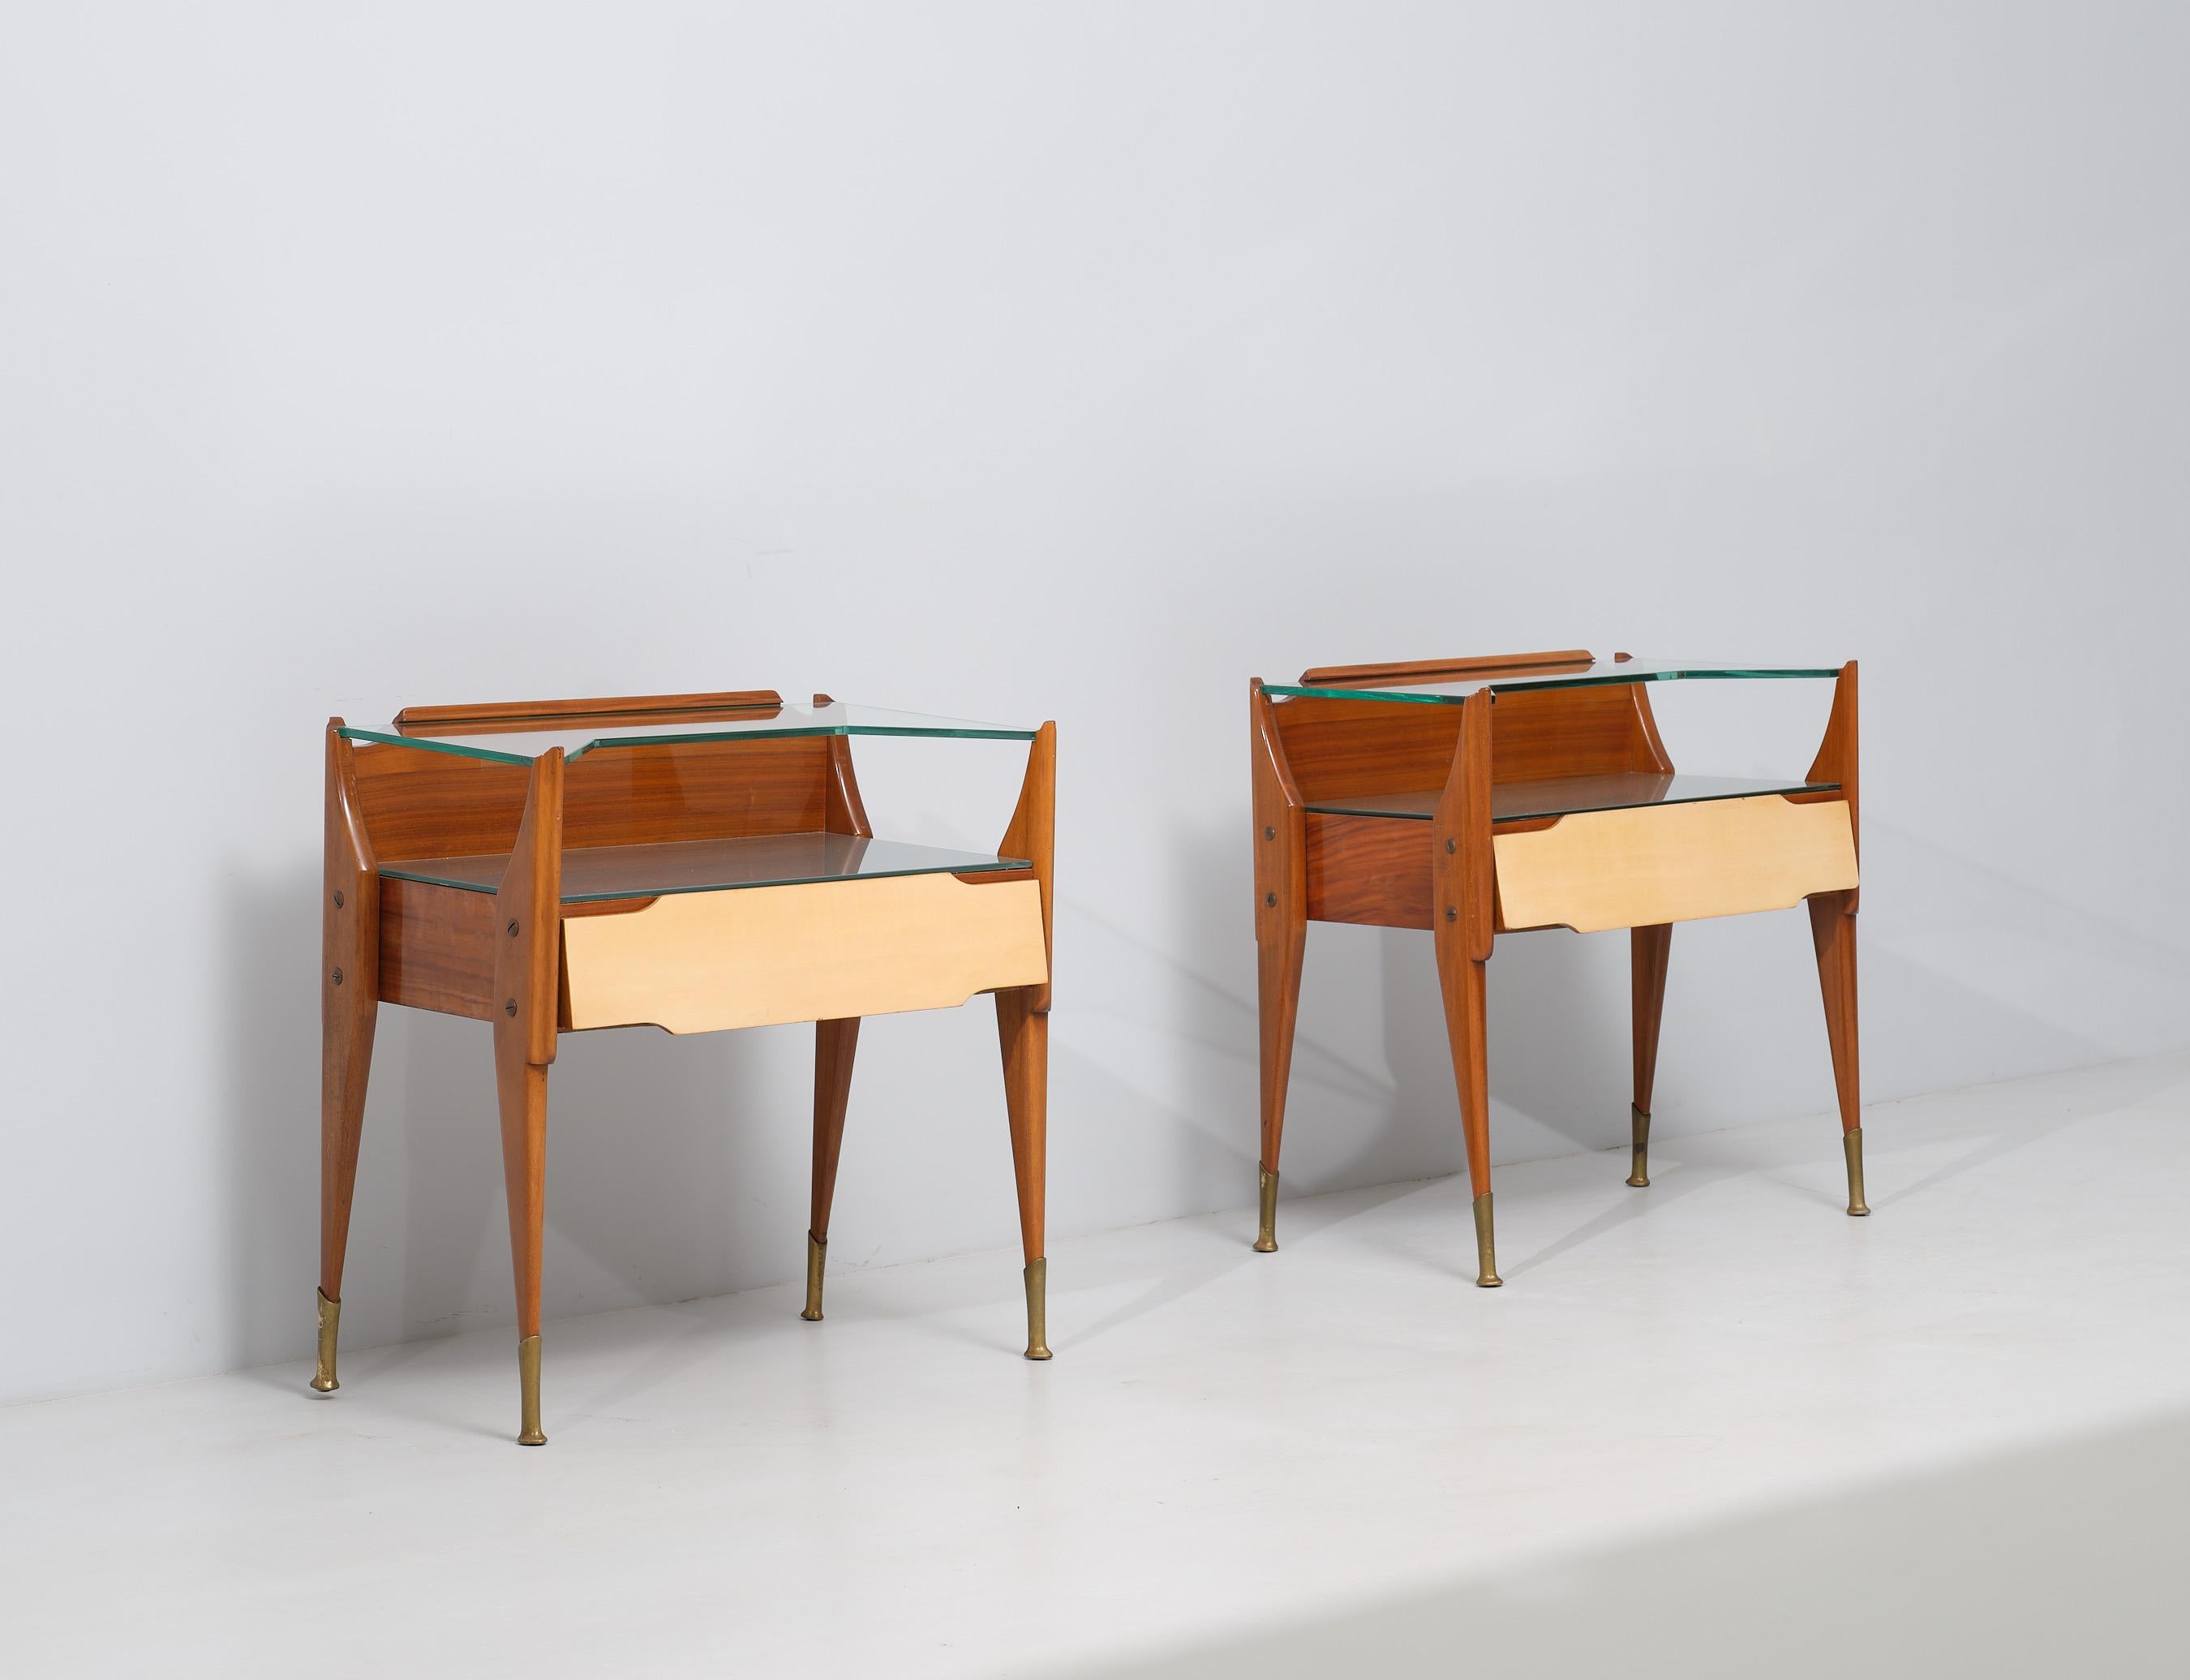 Indulge in the meticulous artistry of 1950s Italian craftsmanship with this remarkable pair of vintage bedside tables. 

These exquisite pieces showcase the mastery of Italian woodworking, exemplifying the attention to detail and precision that